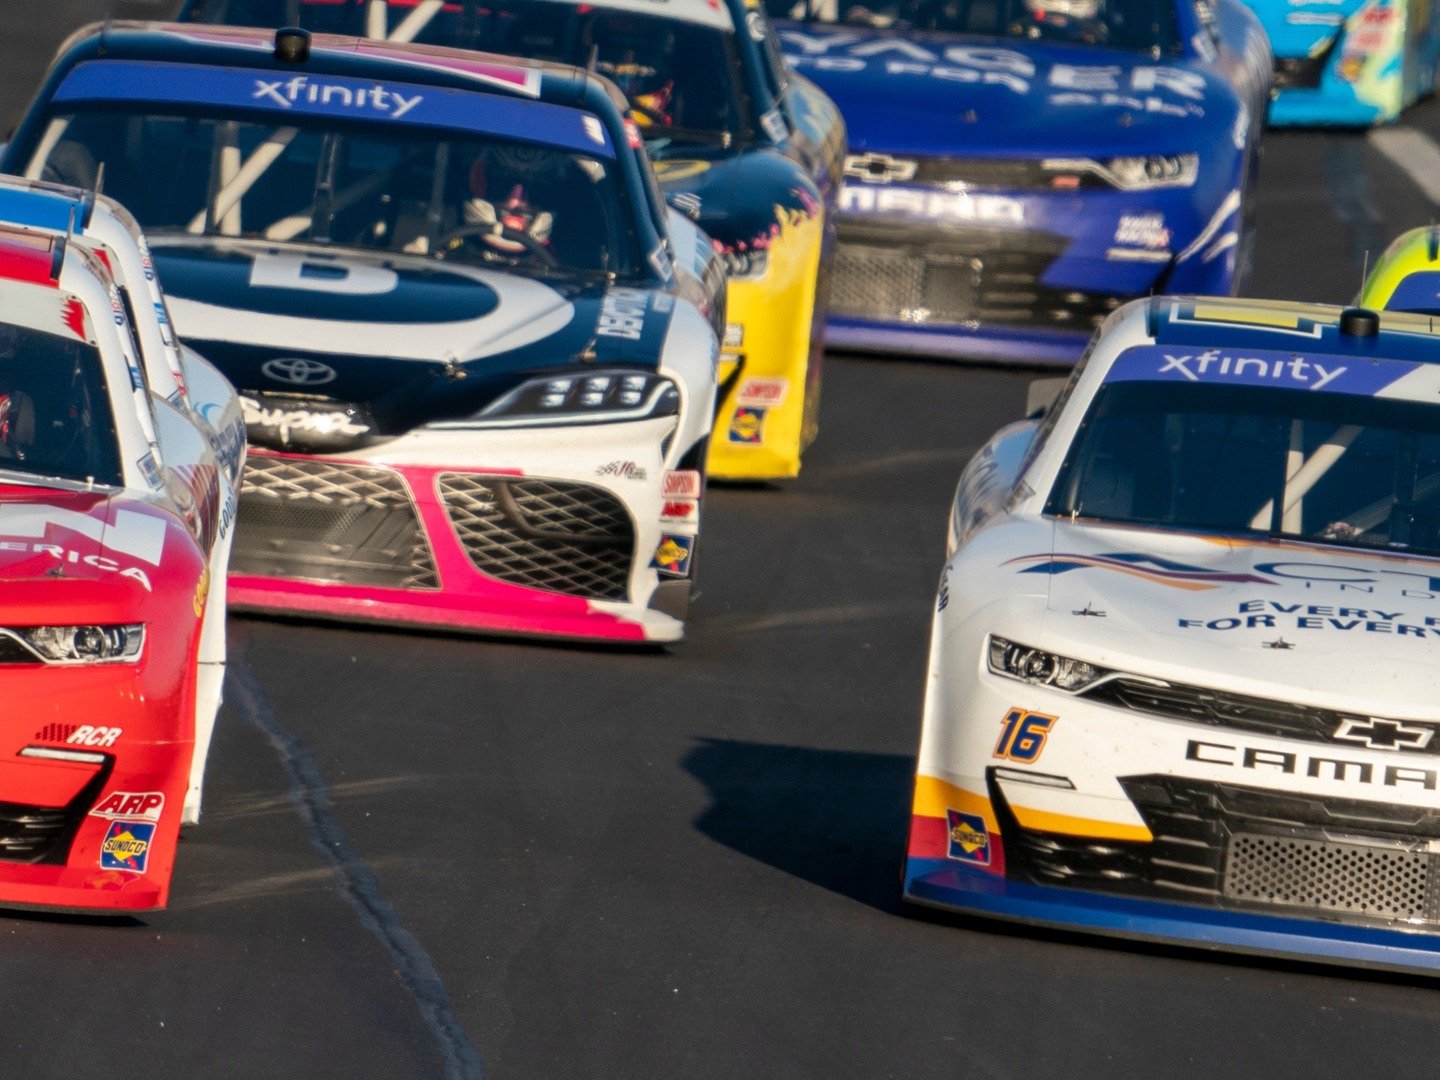 NASCAR Xfinity Series Post Race on TV Channels and schedules